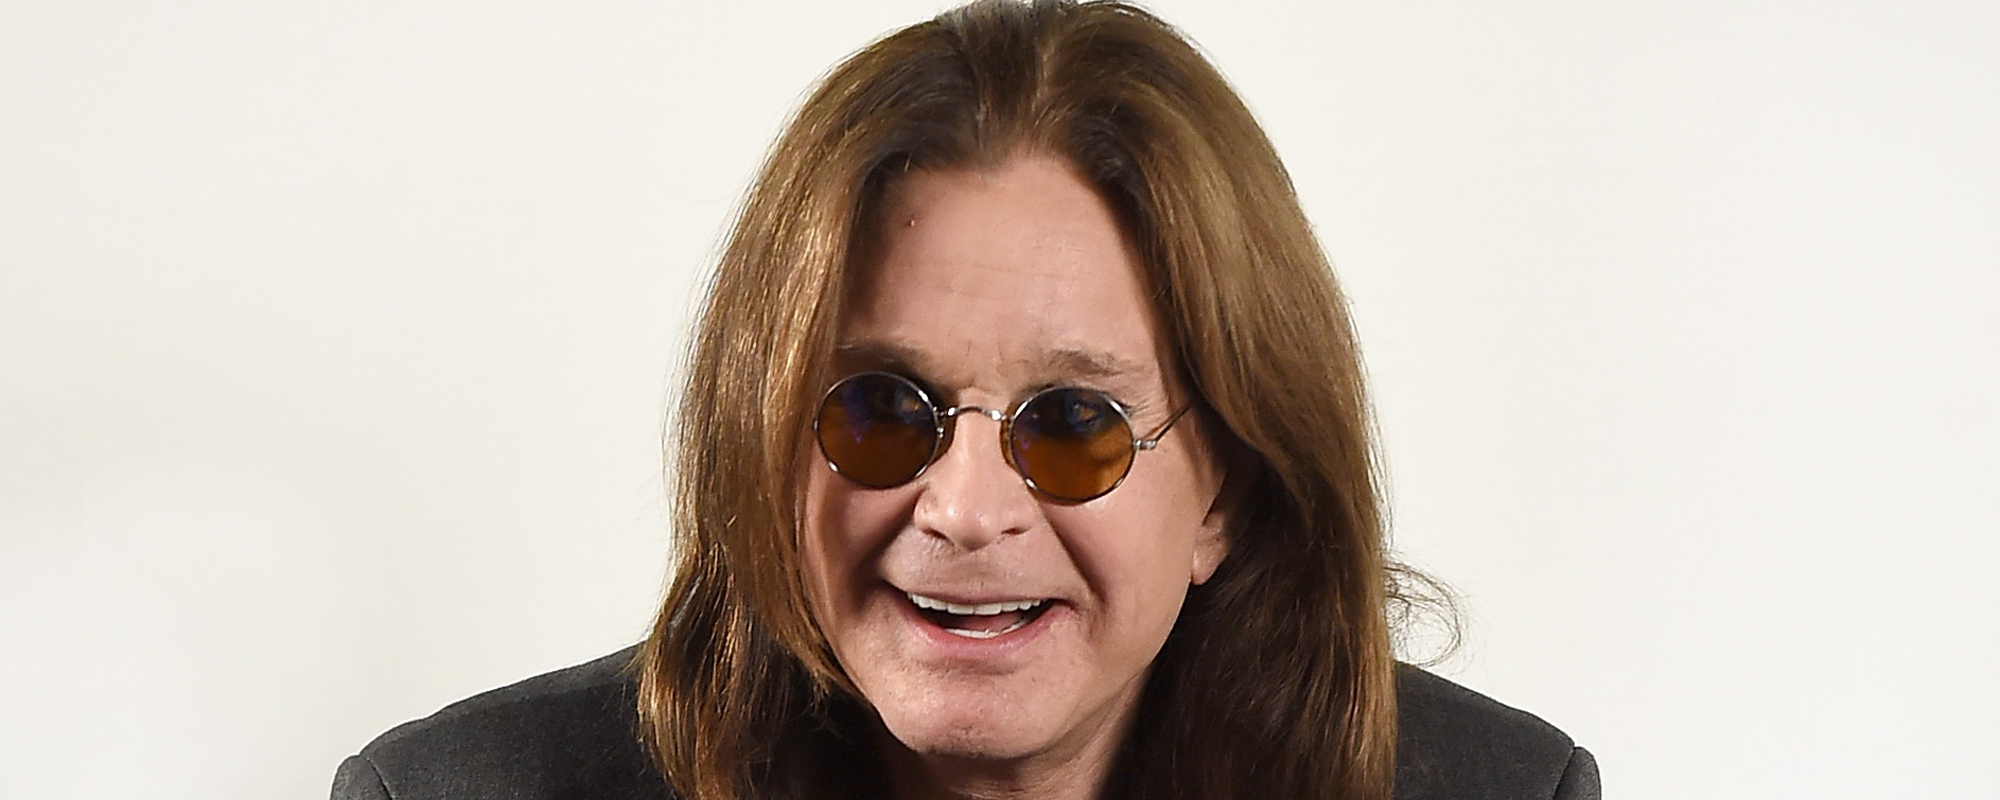 Ozzy Osbourne Shares Health Update With Billy Morrison: “It’s a Slow Recovery”